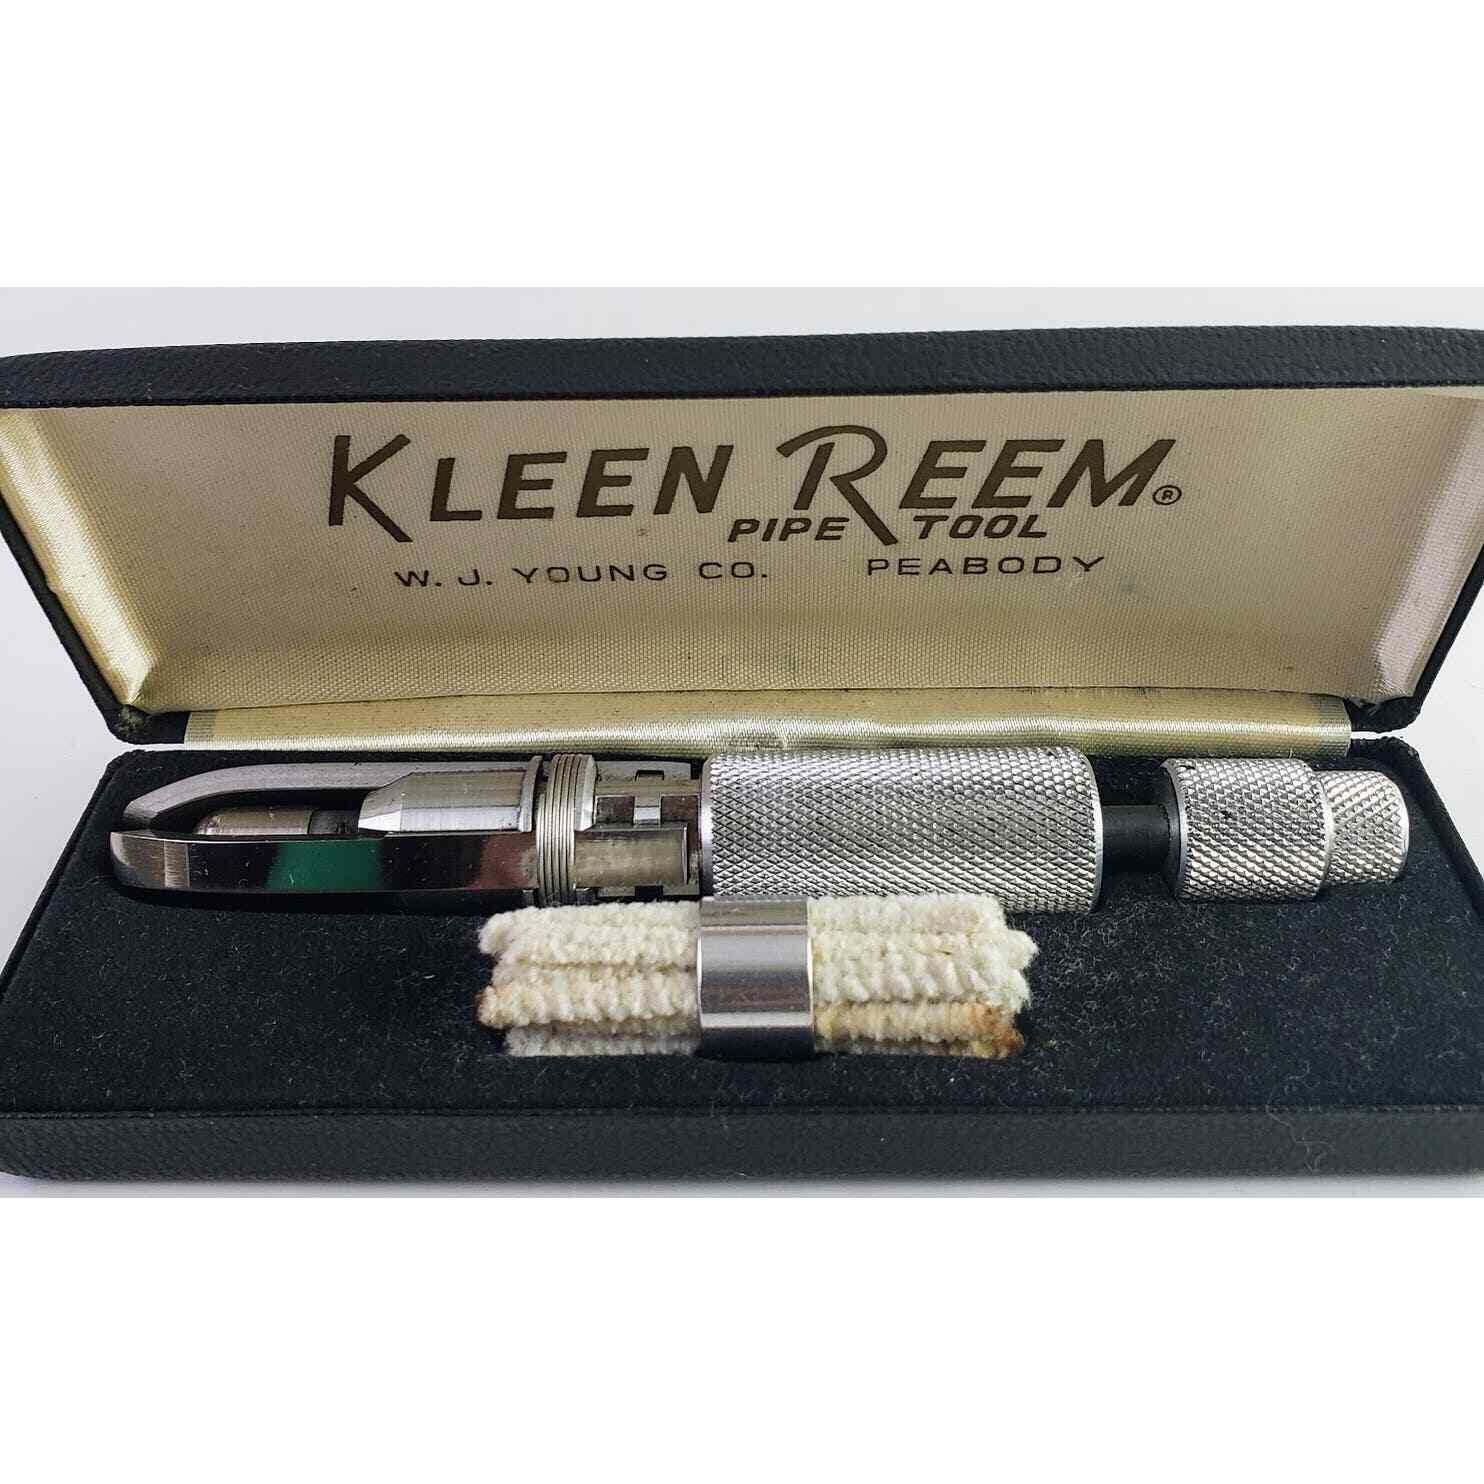 Vintage Kleen Reem by W.J. Young Co. Peabody Pipe Tool - Fast Shipping